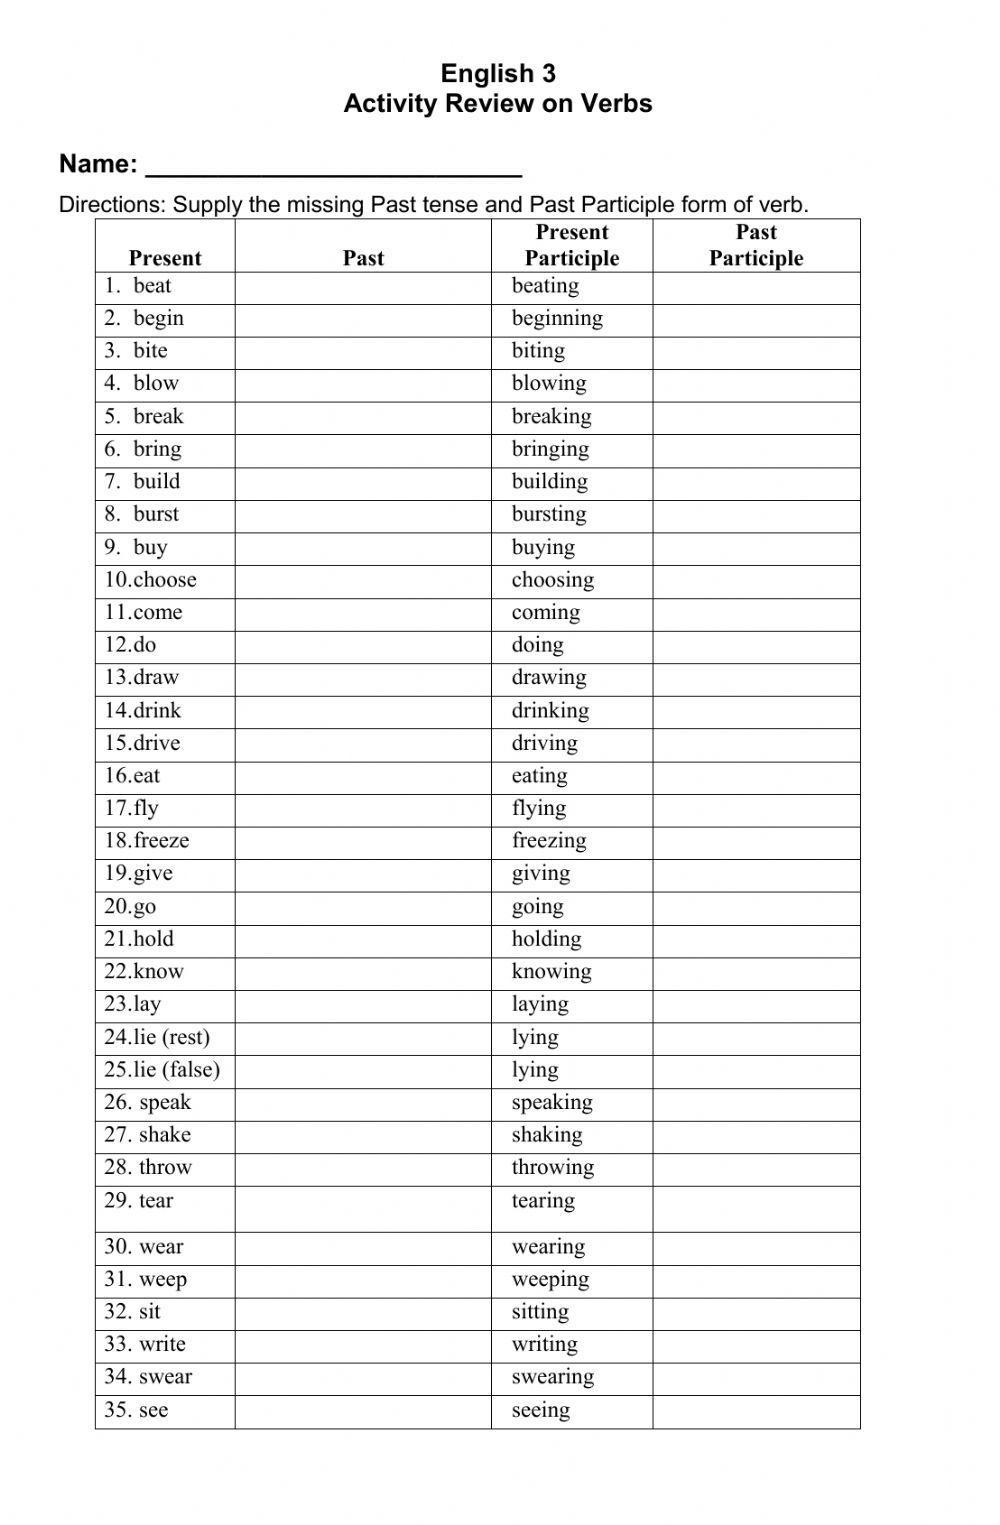 English 3 Verb Tenses and Form of Verb worksheet | Live Worksheets